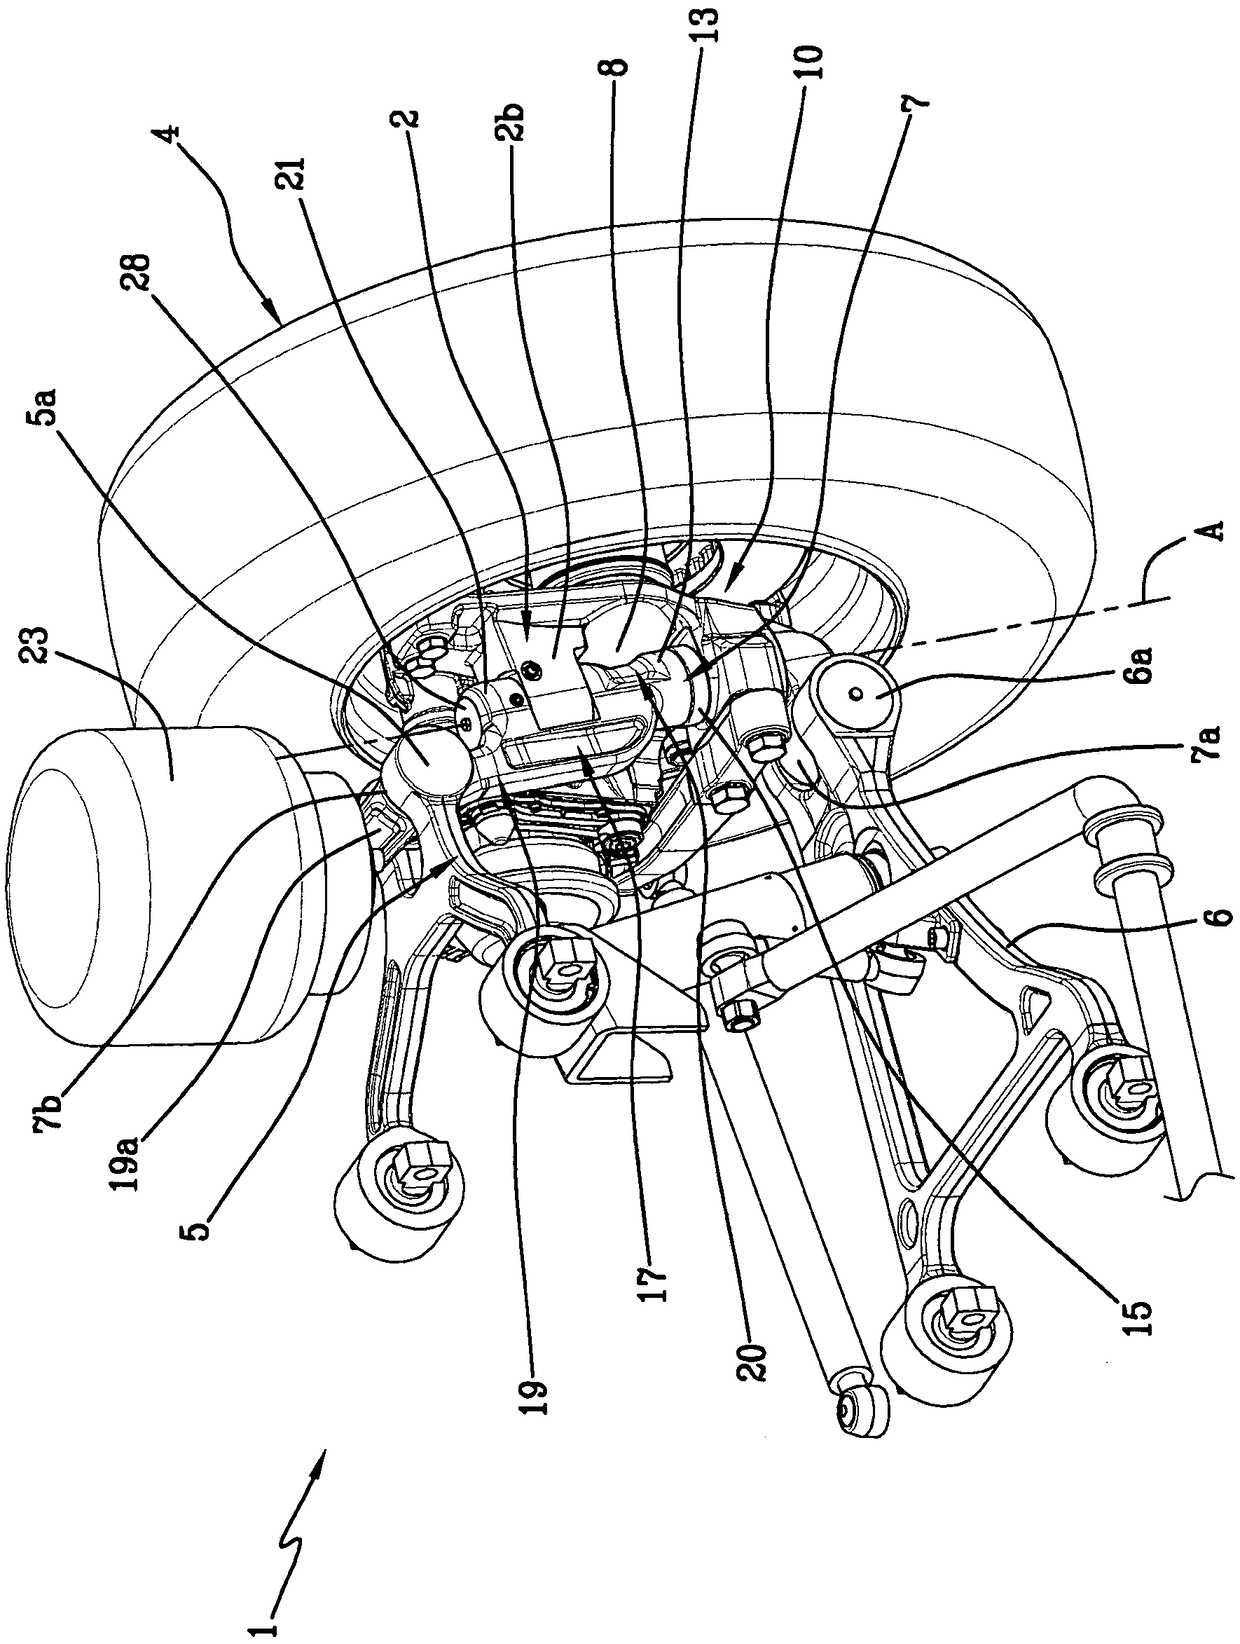 Independent suspension for vehicles, in particular suspension for directional wheel for vehicles